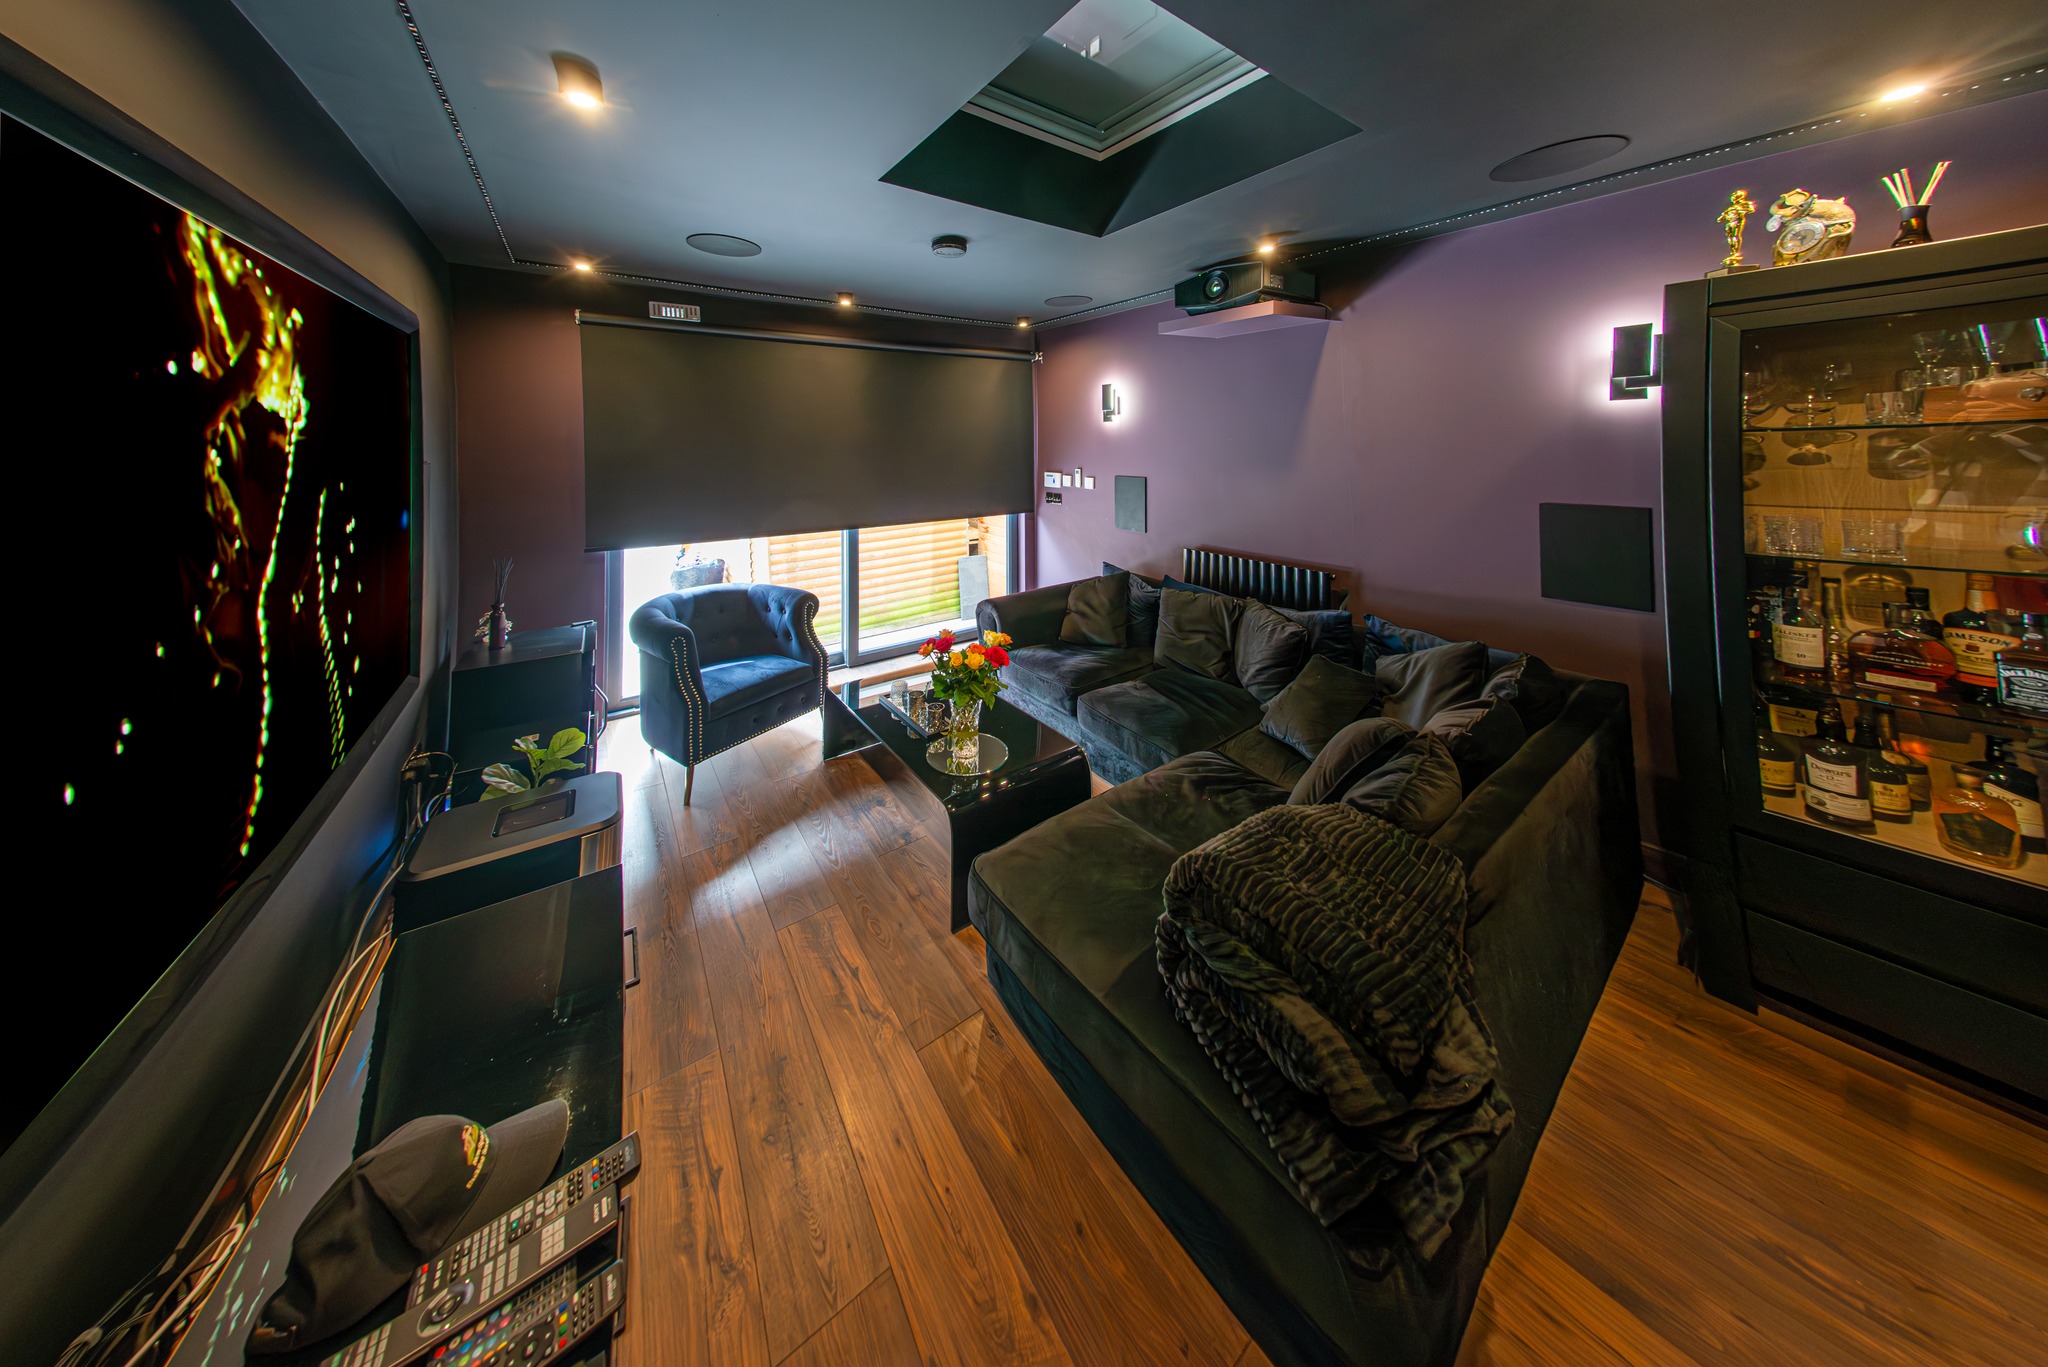 Certified EU & Irish building and acoustic materials used in the construction of the Home Cinema room